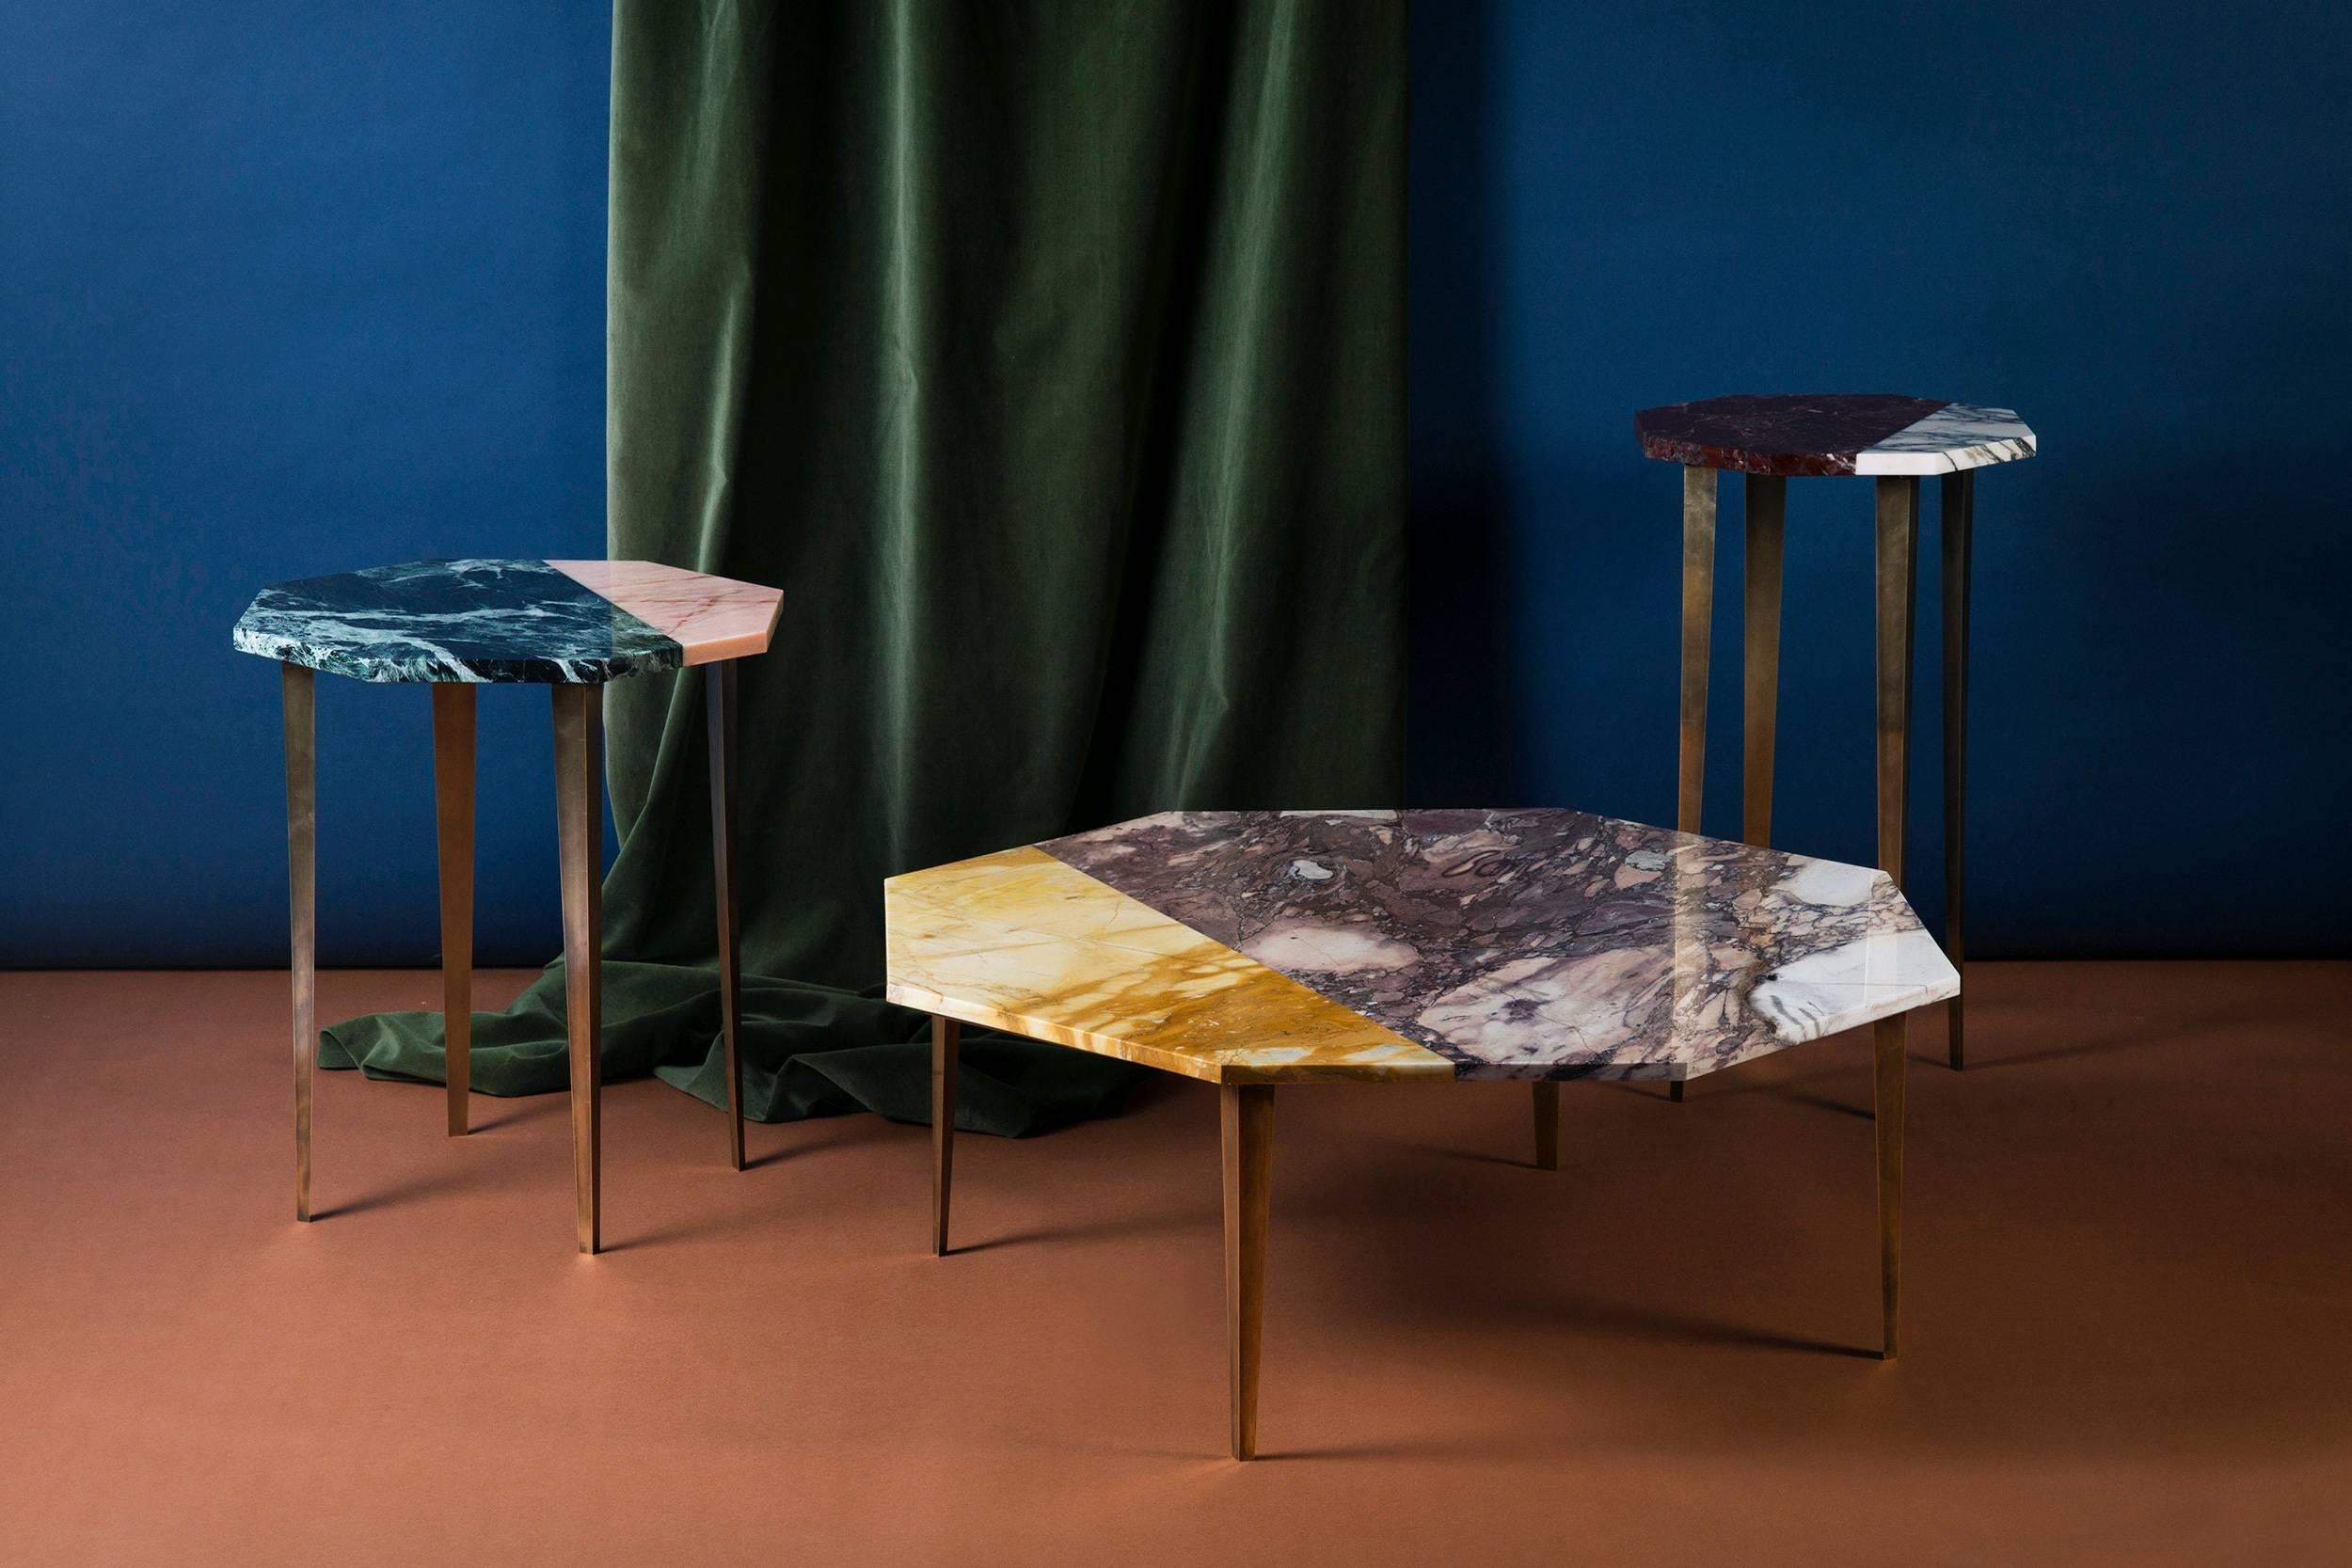 Thierry cocktail table, measures: 35 x 62cm. Rosso Levanto and African violet marble, brass.

Launched at the Salone del Mobile 2017, Campbell-Rey present their Thierry table collection.

Comprised of three tables-a cocktail table, a side table